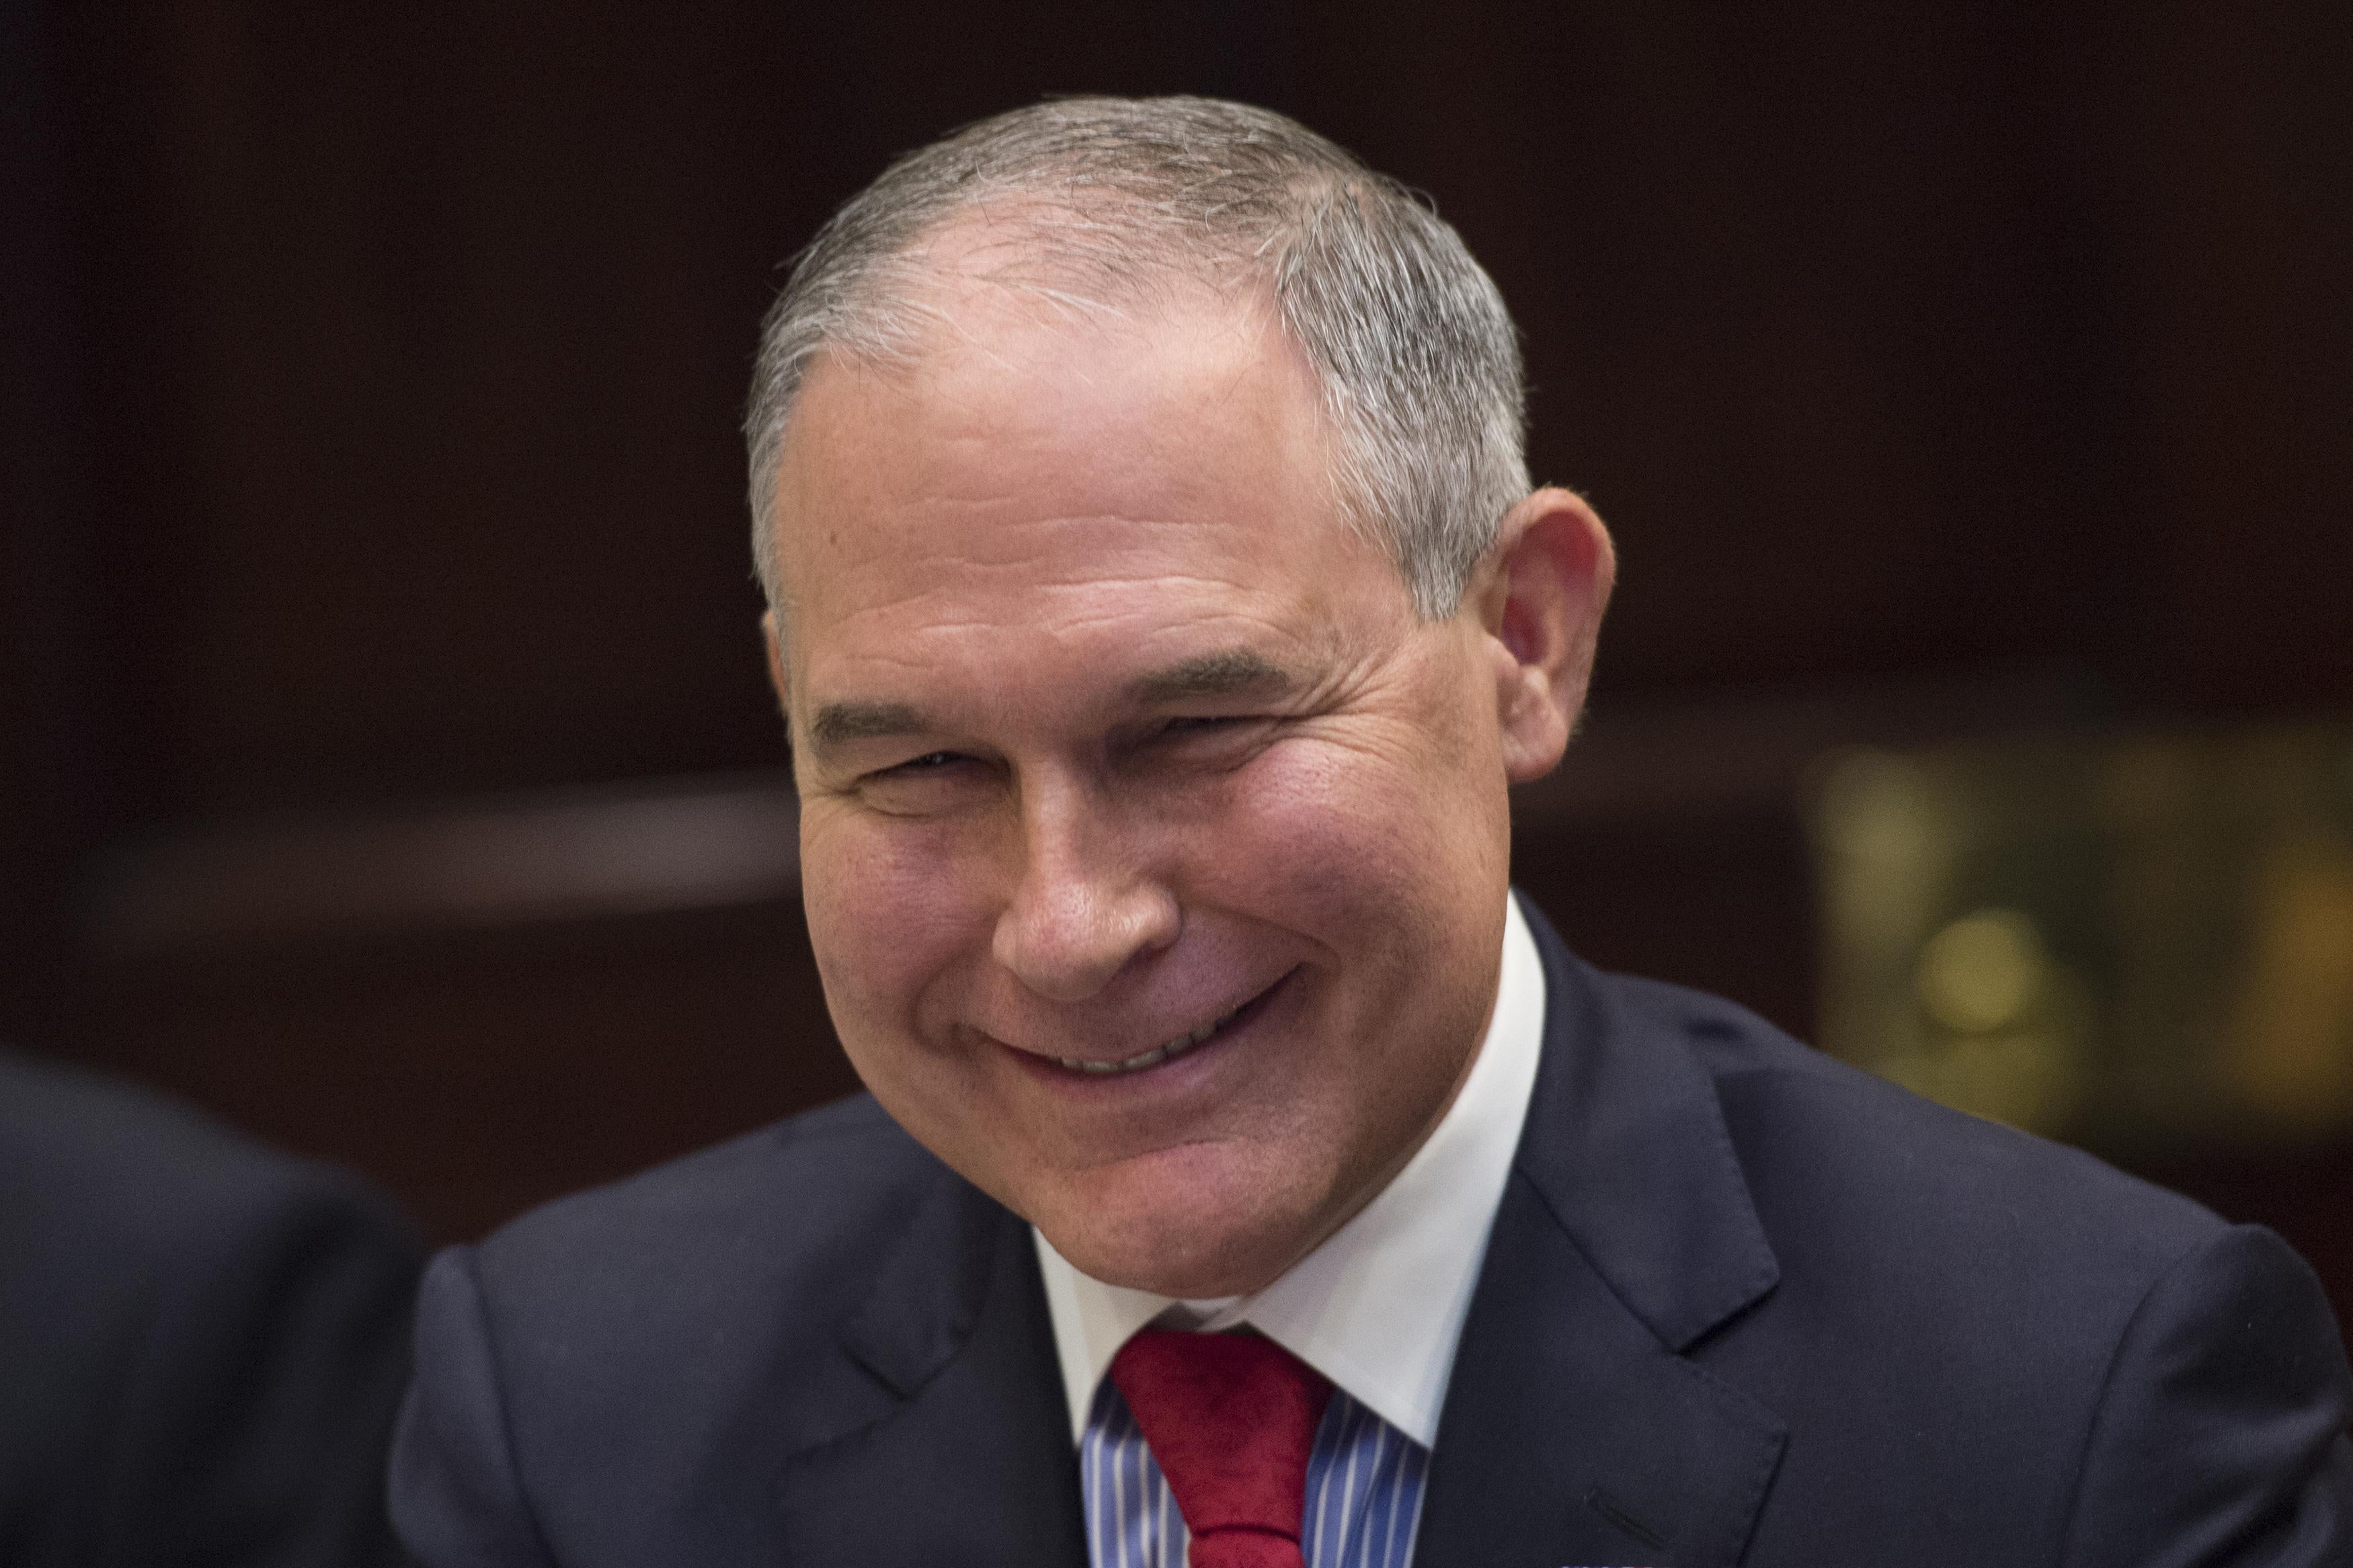 EPA Administrator Scott Pruitt smiles while President Donald Trump leads a tribal, State, and local energy roundtable in the Roosevelt Room at the White House on June 28, 2017 in Washington, D.C. 